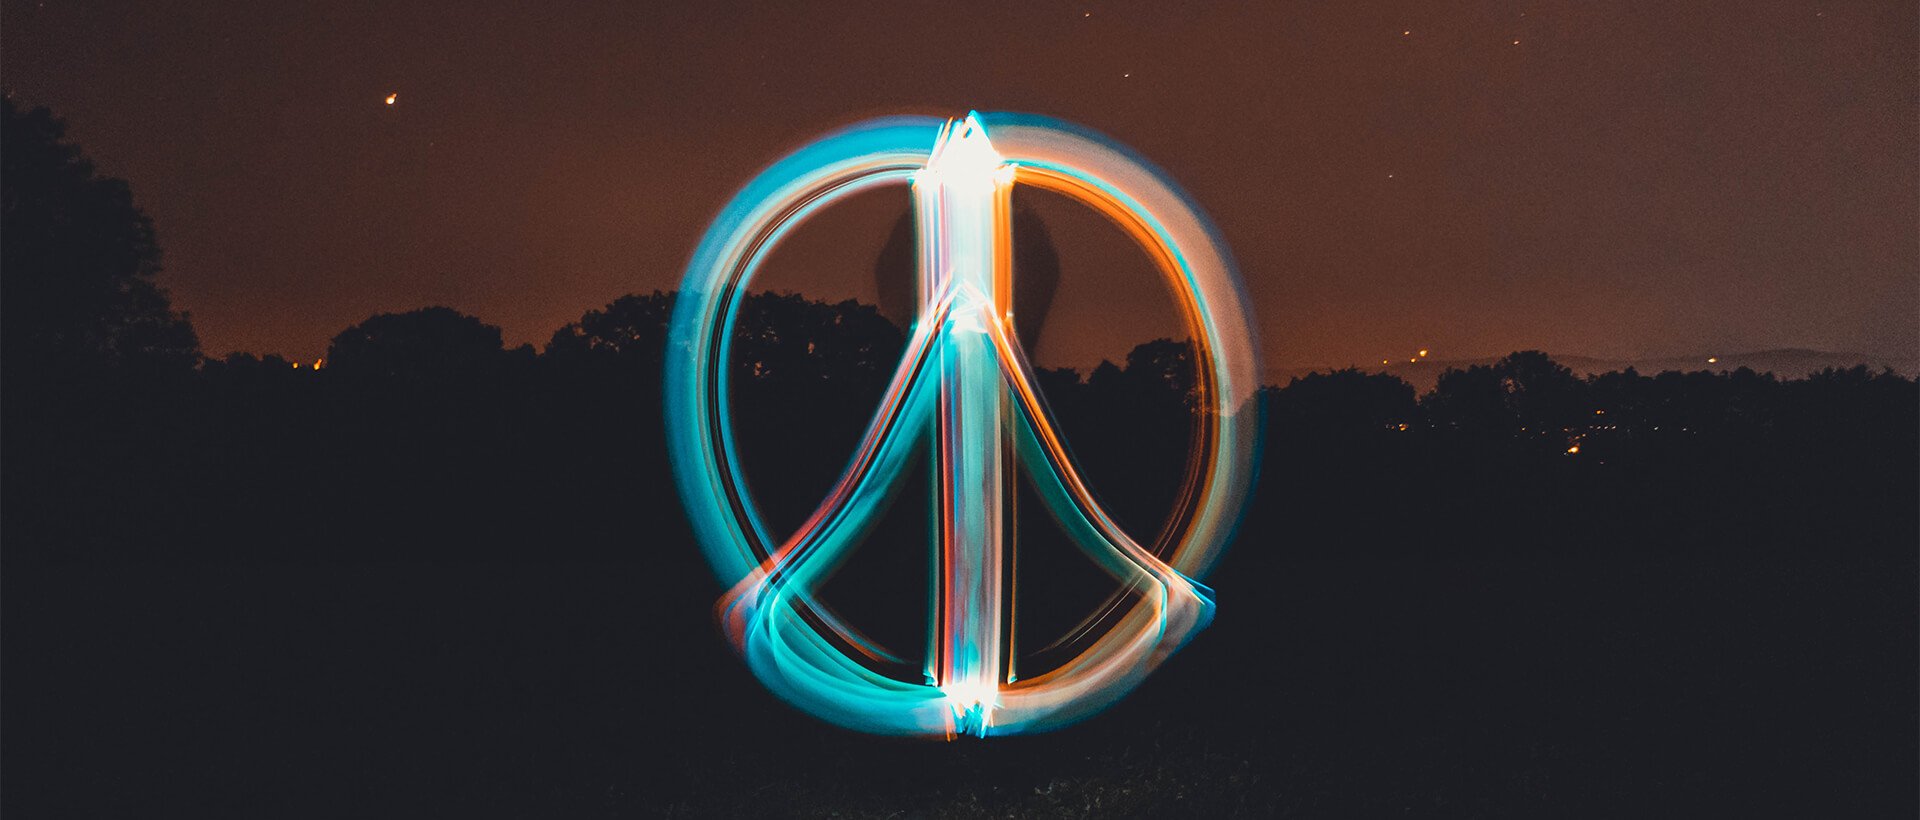 a long exposure photo of a peace sign.